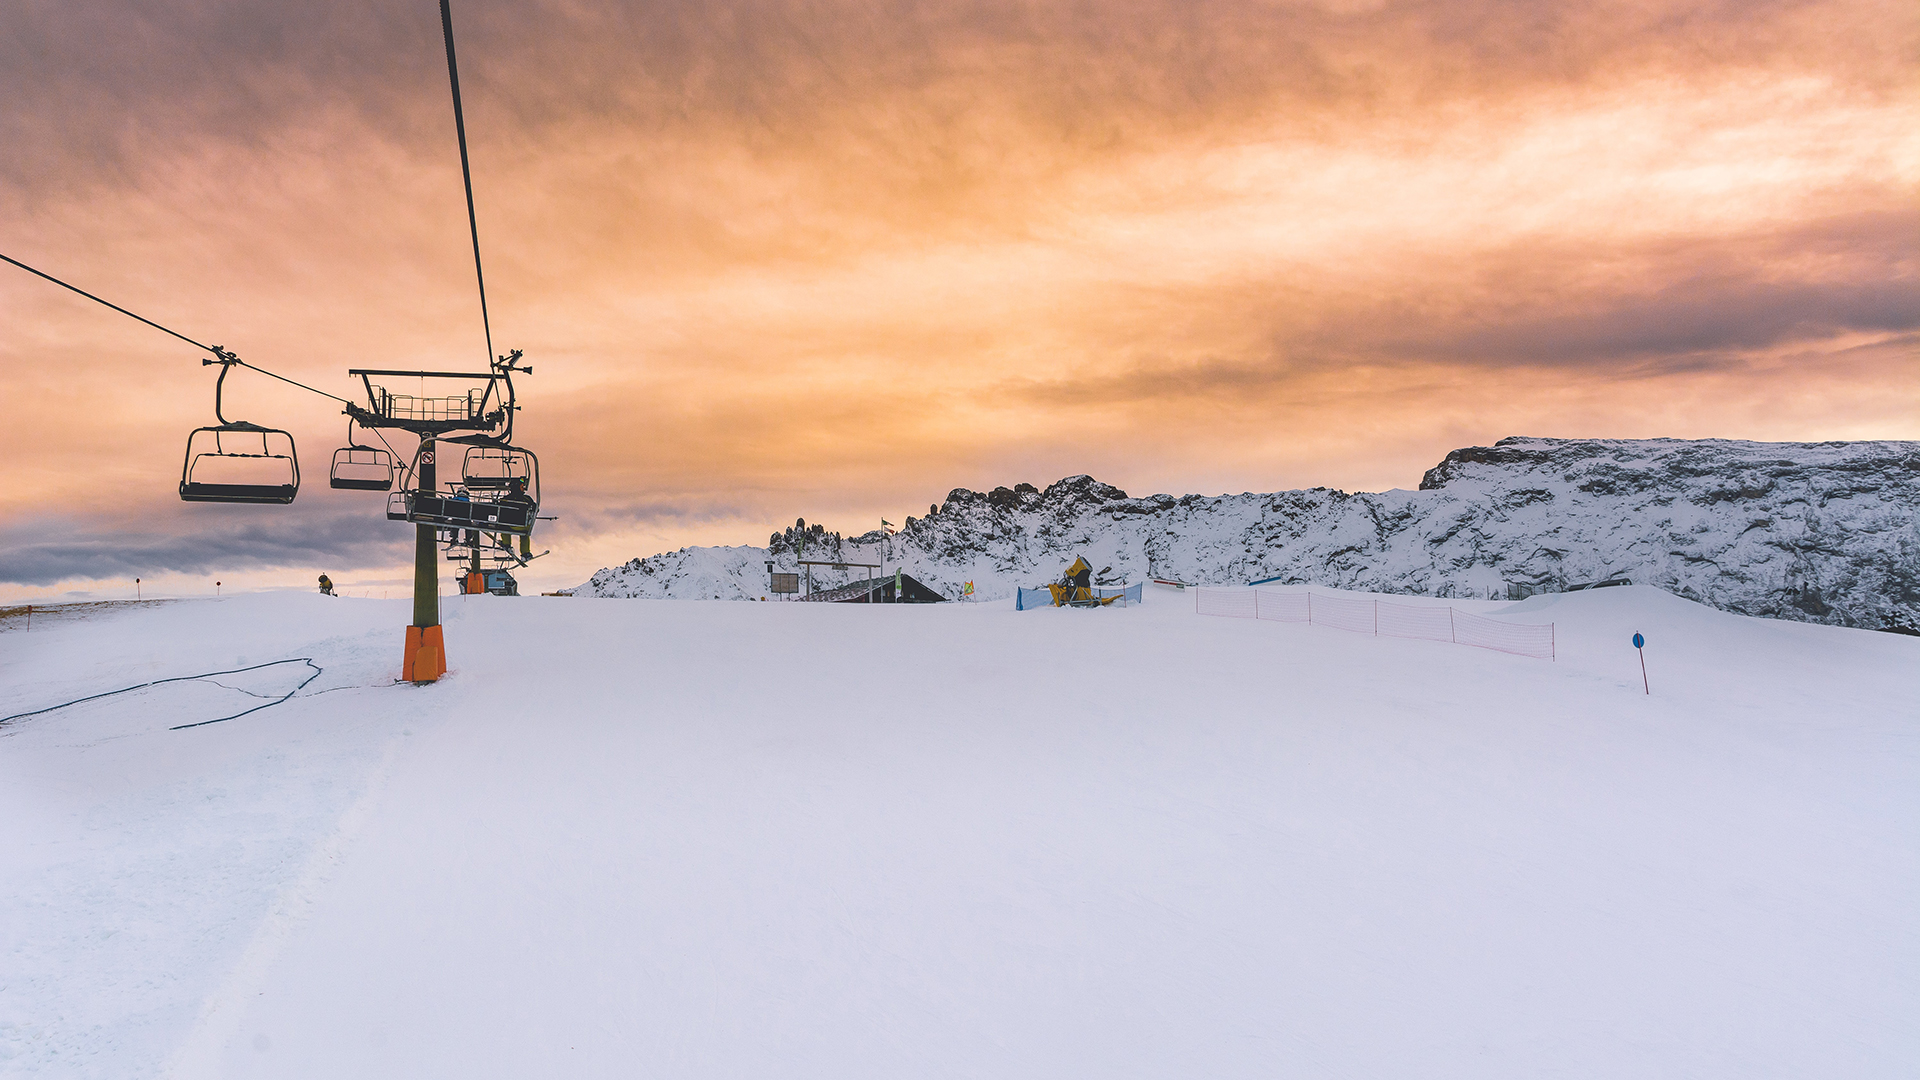 Snow covered ski field with ski lift on left hand side, and snow covered mountain in the background against a sunset.